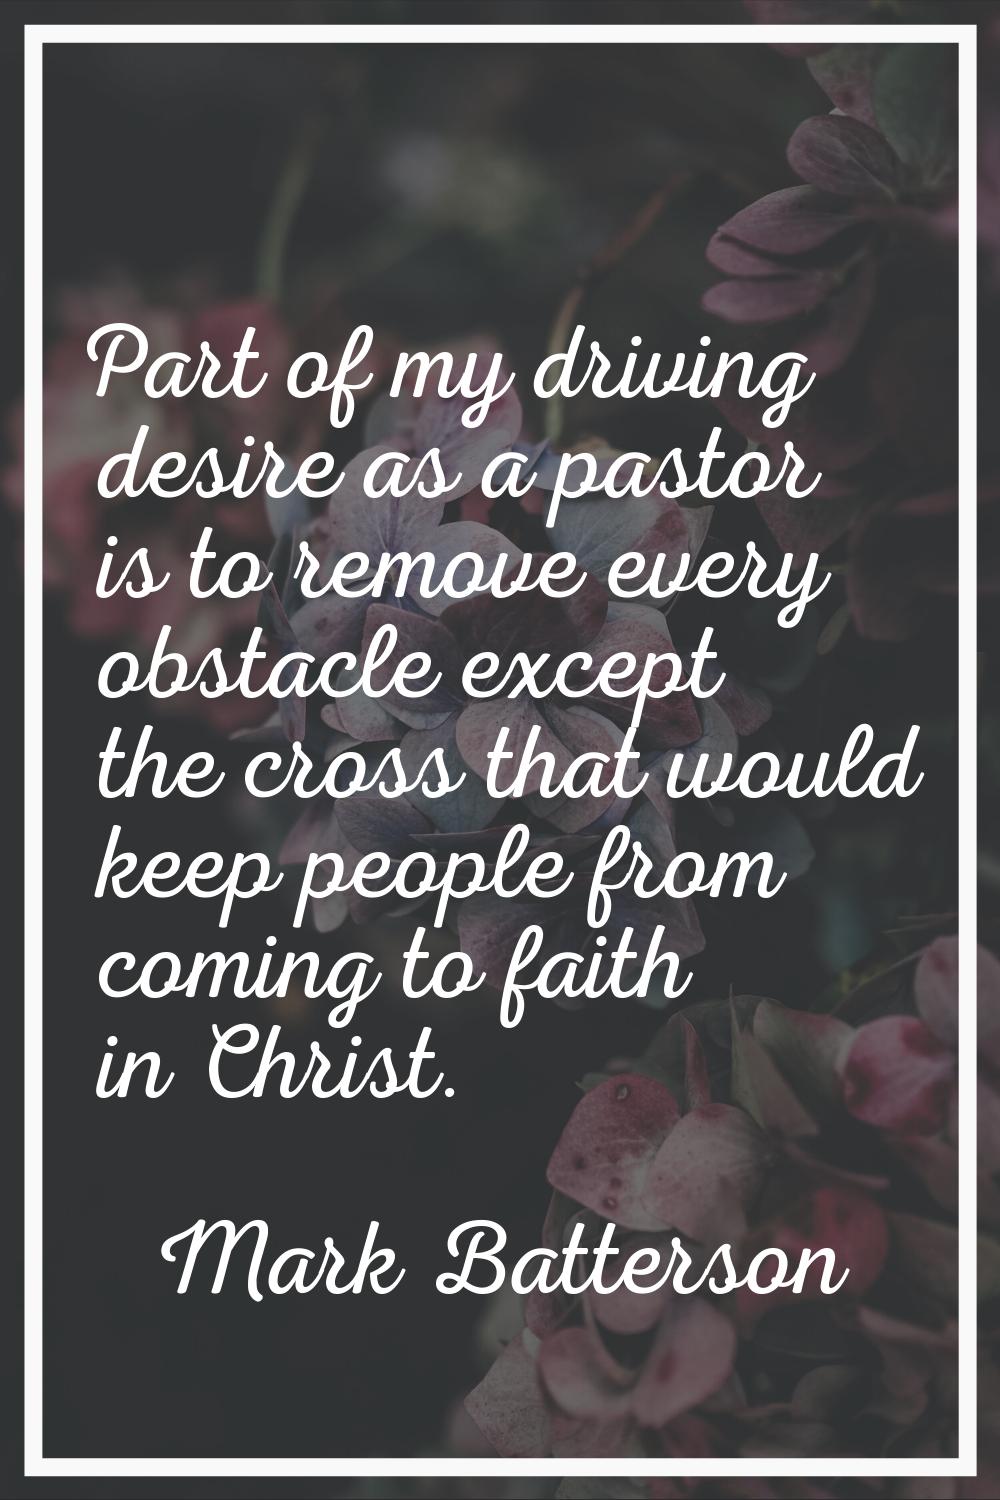 Part of my driving desire as a pastor is to remove every obstacle except the cross that would keep 